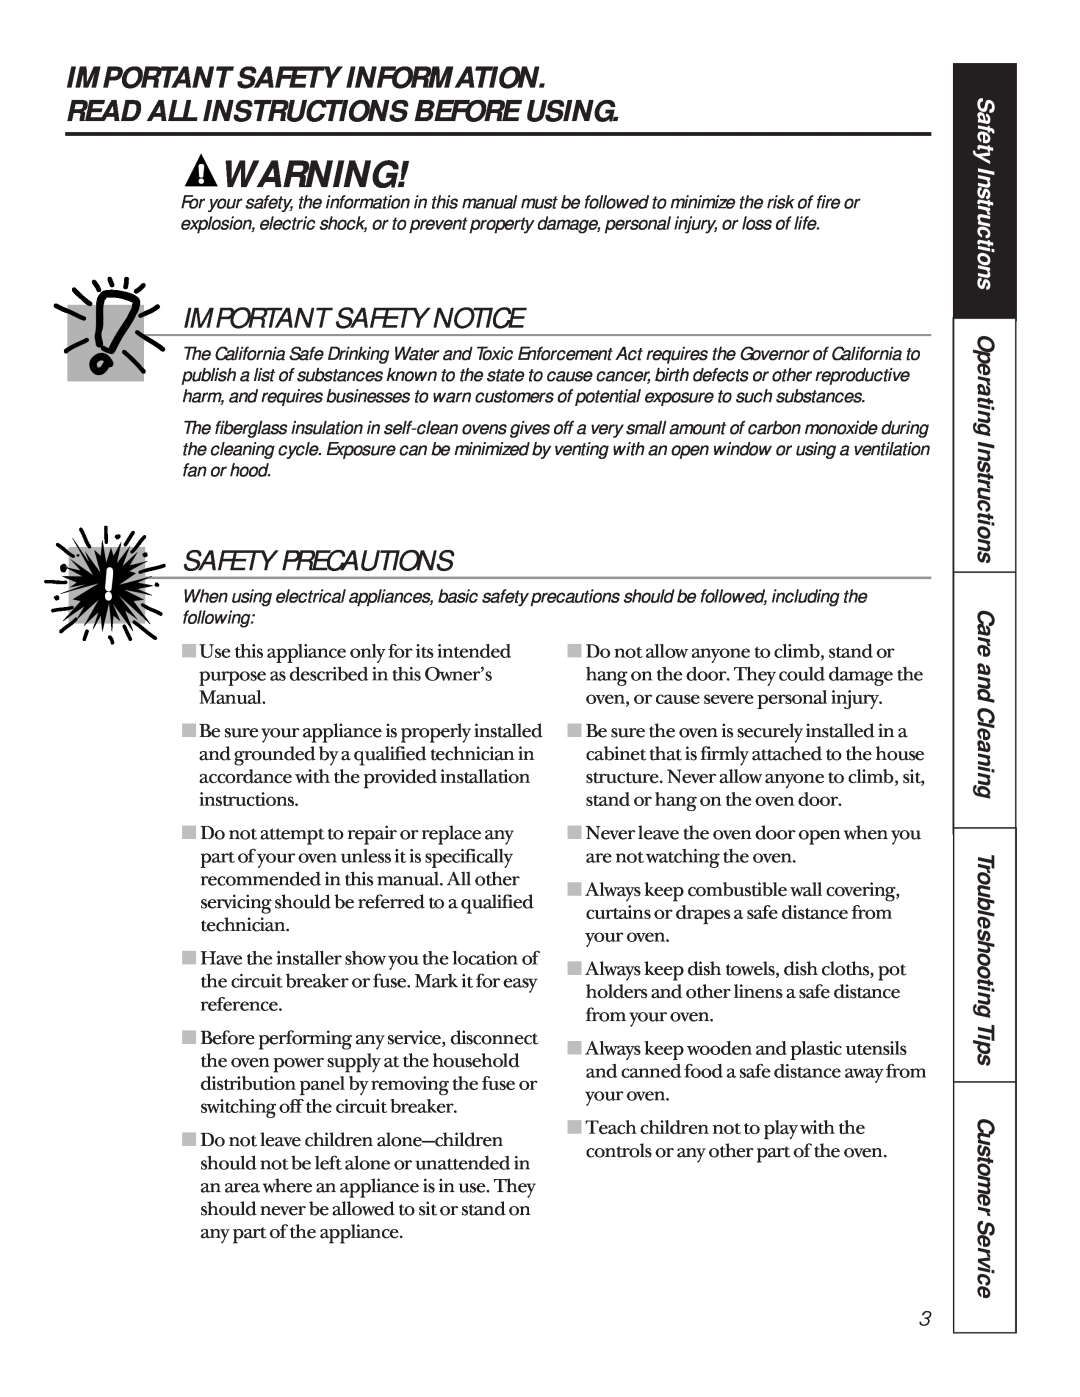 GE jt950 Important Safety Information Read All Instructions Before Using, Important Safety Notice, Safety Precautions 